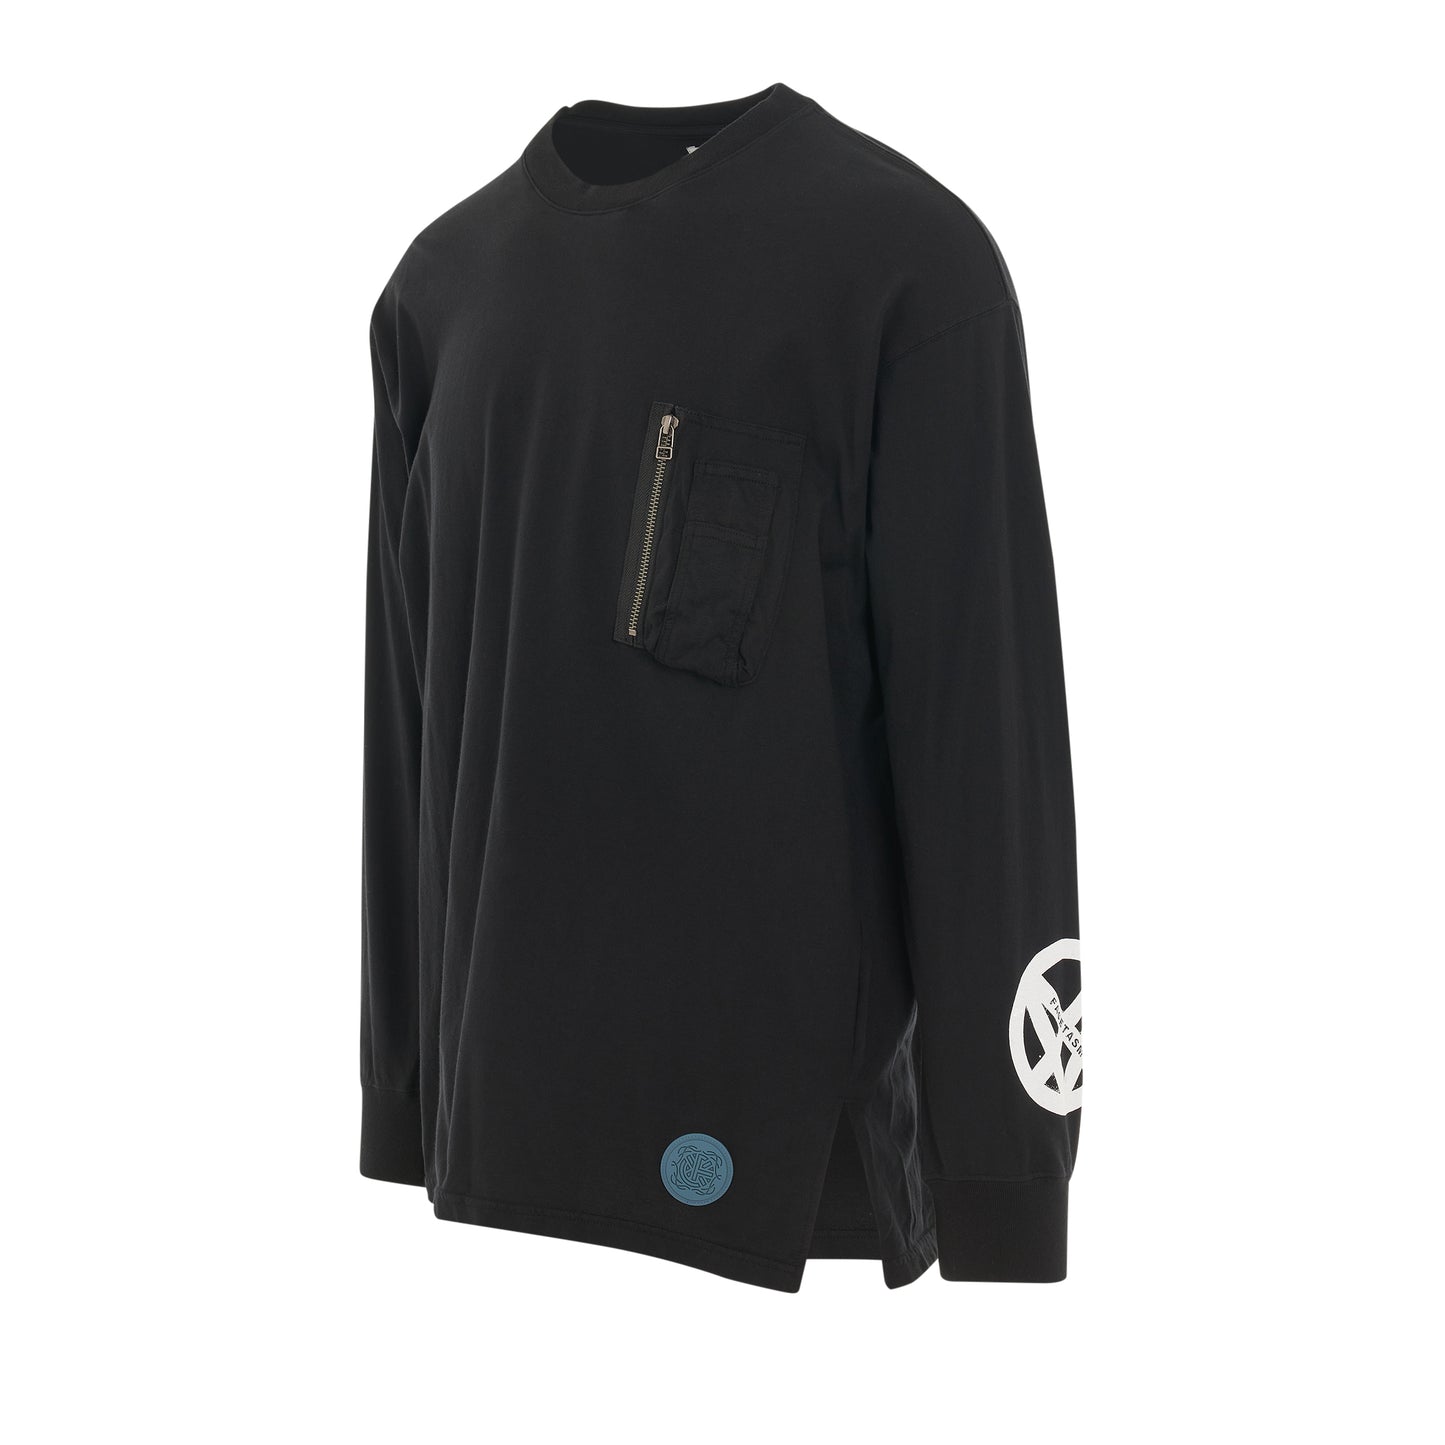 Anarchy Pocket Long Sleeve T-Shirt in Black